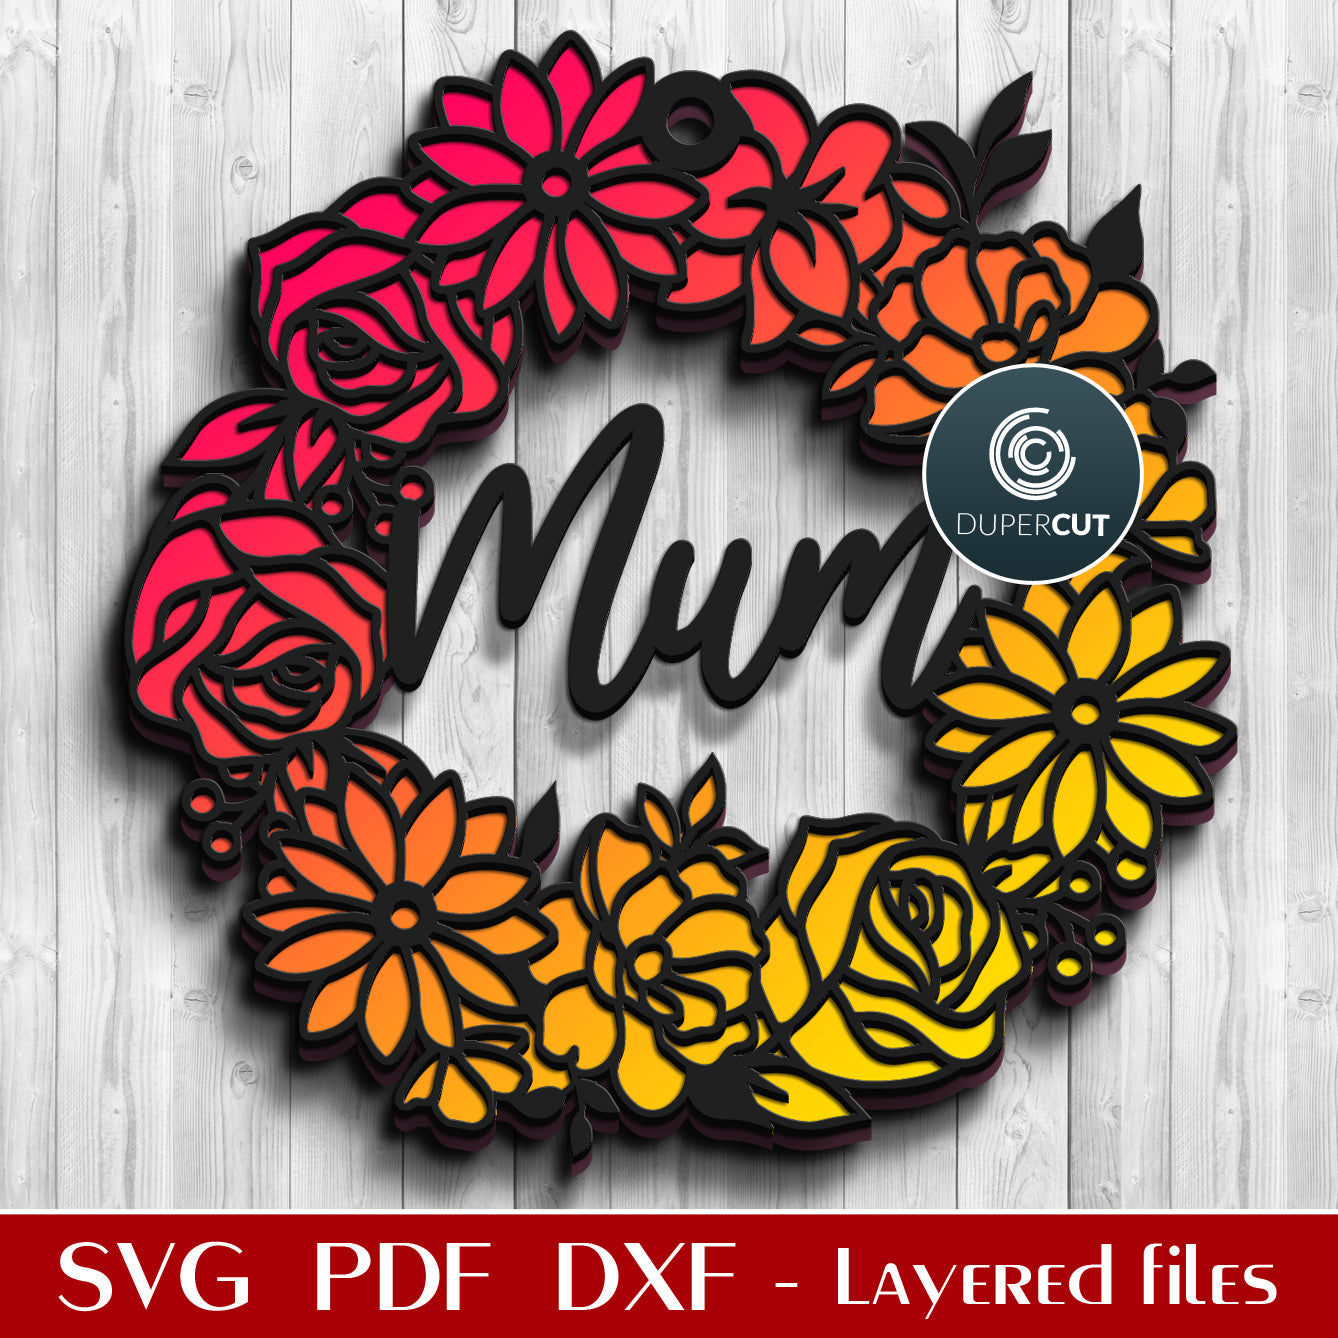 Mother's Day MUM flower wreath door hanger - SVG DXF layered laser cutting files for Glowforge, Cricut, Silhouette, CNC plasma machines, scroll saw pattern by www.DuperCut.com 